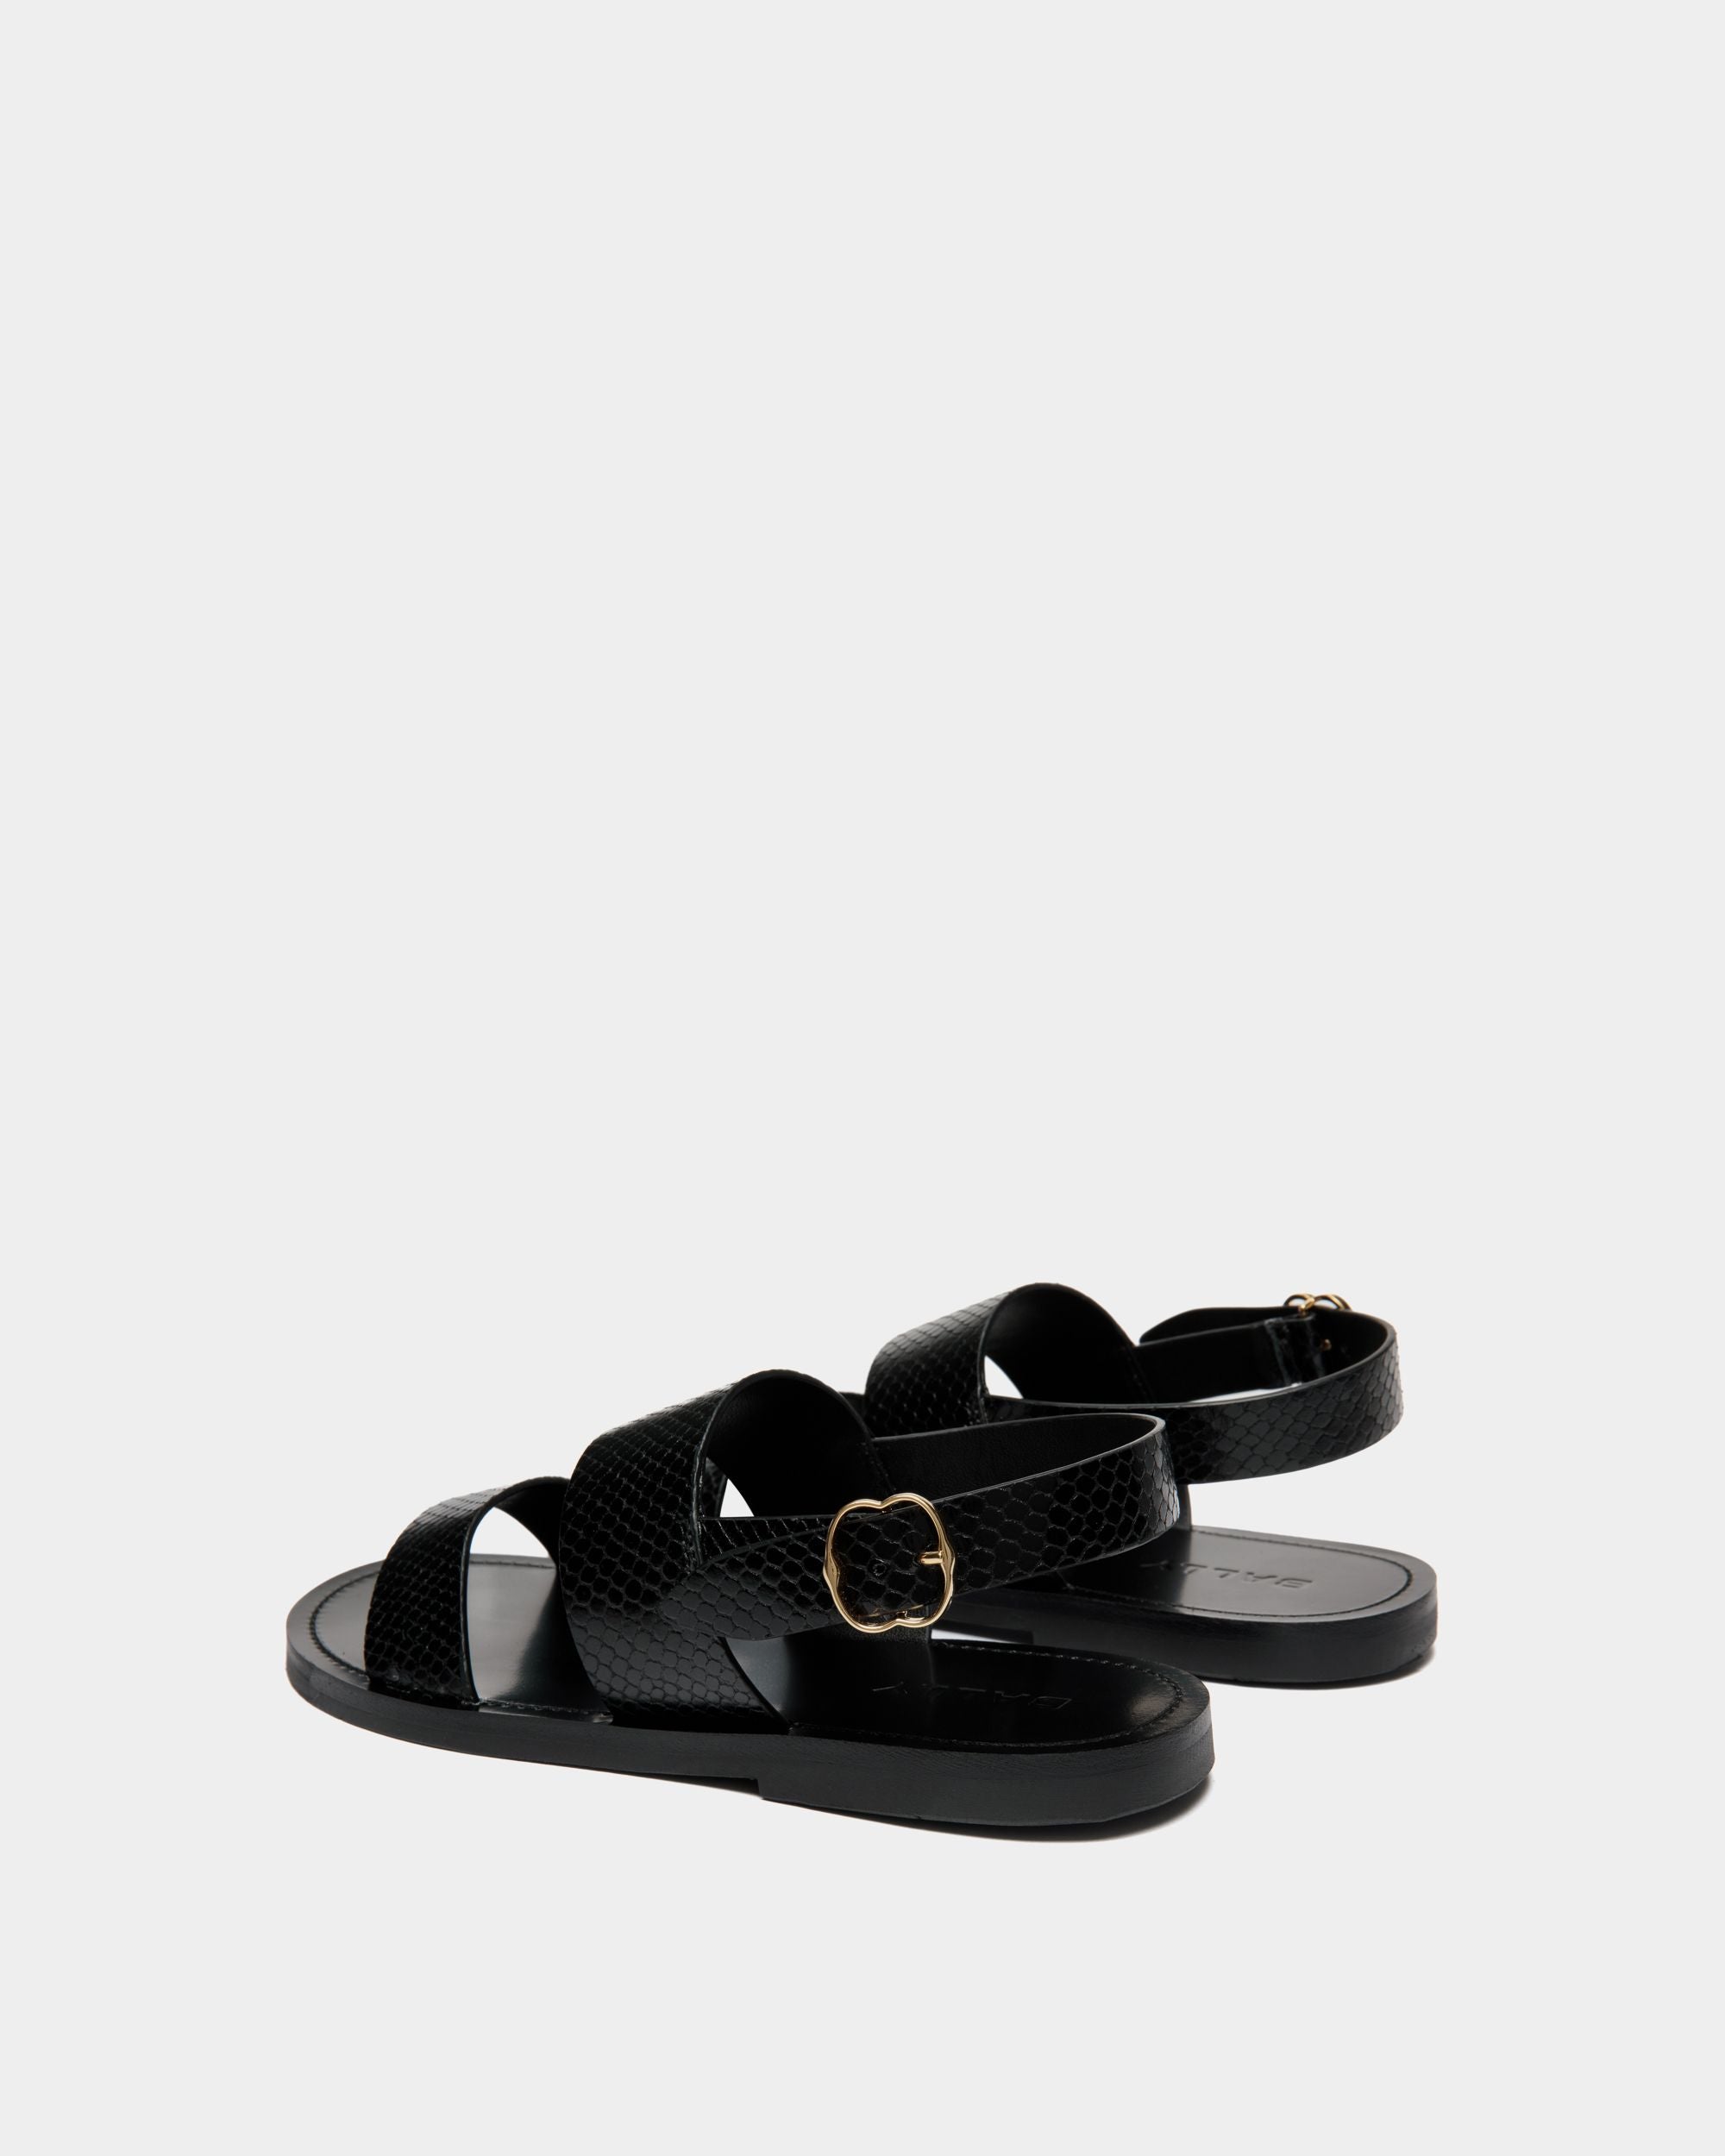 Baudy | Women's Flat Sandal in Black Python Printed Leather | Bally | Still Life 3/4 Back